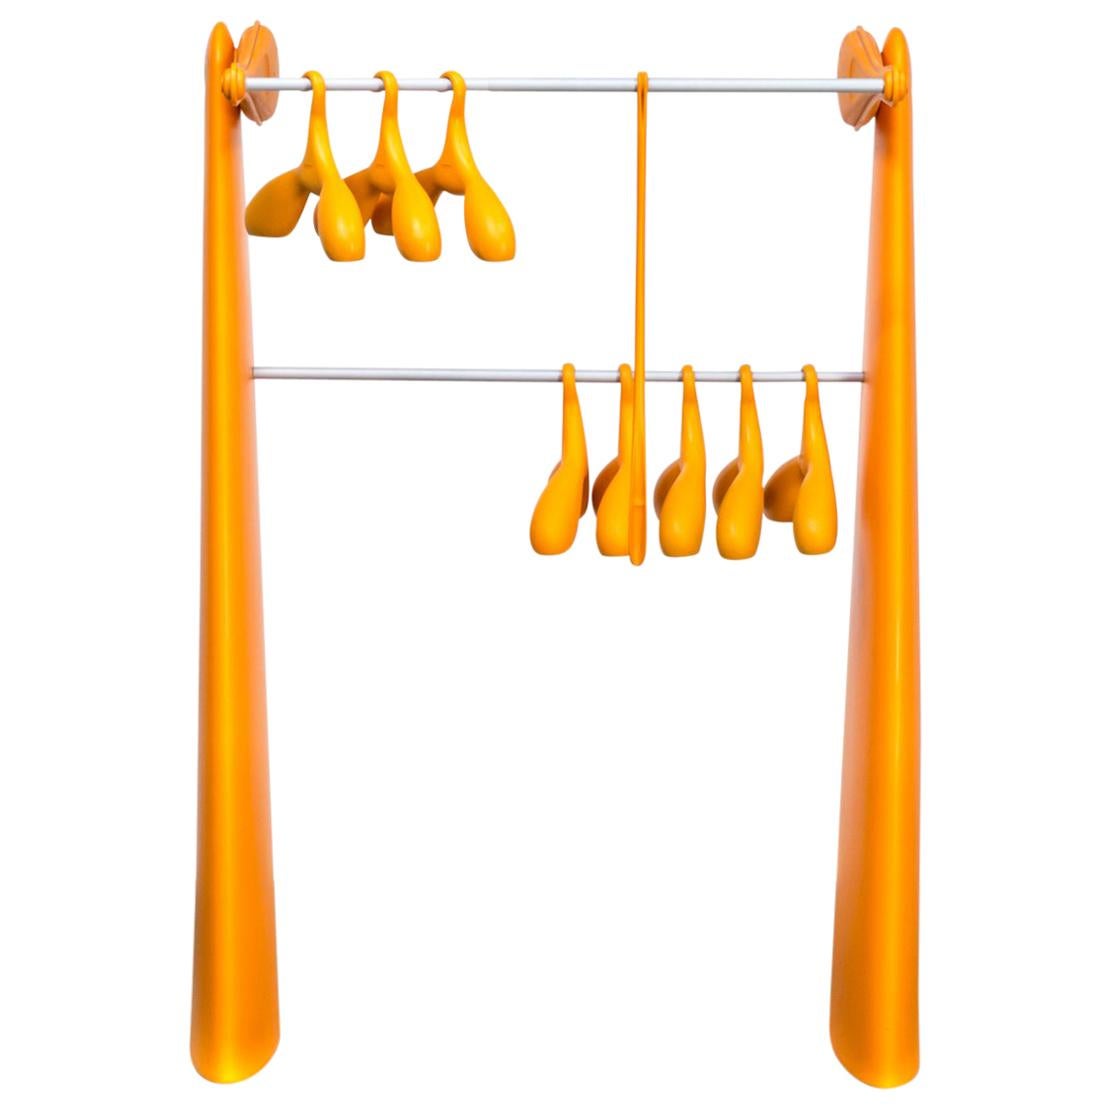 E. Terragni Coat Stand ‘Atelier’ & Servetto Lift and Dino Clothes Hangers im Angebot